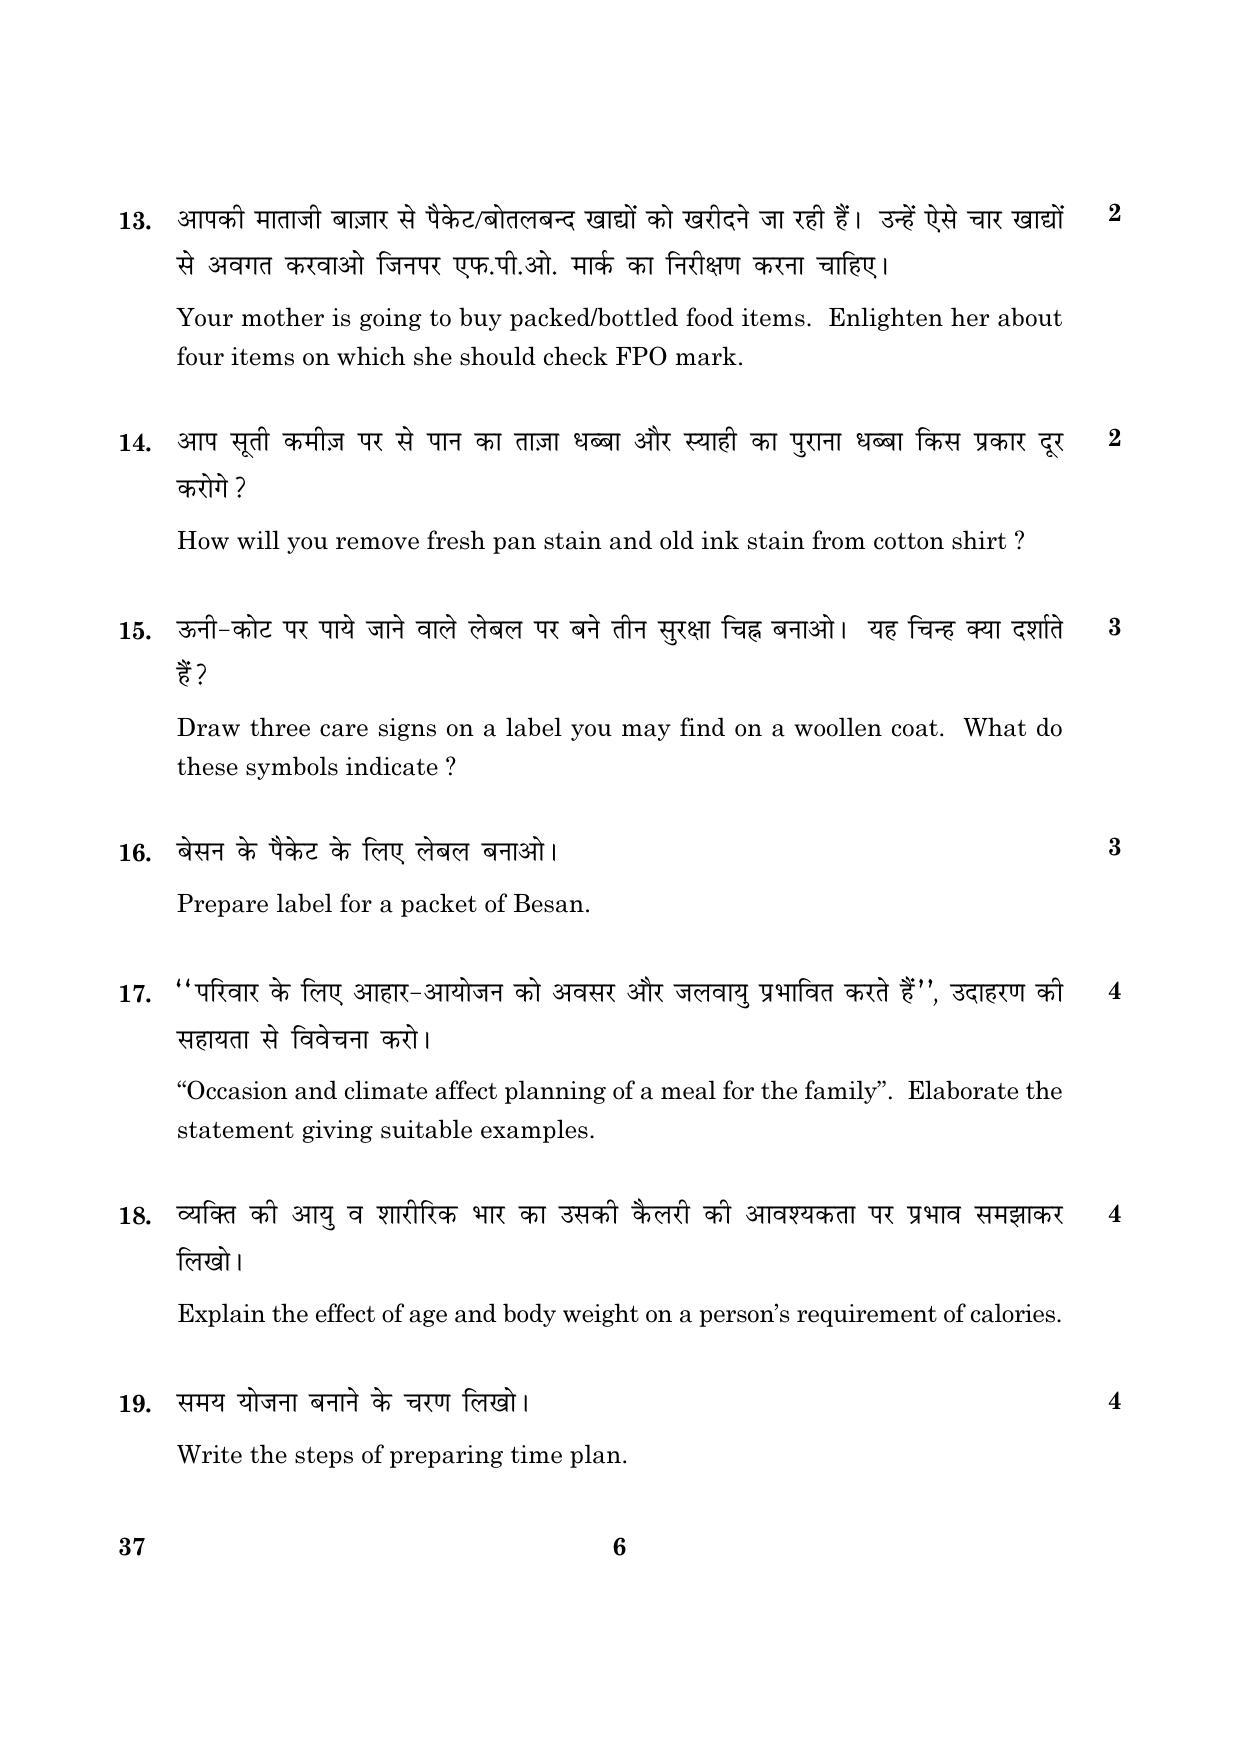 CBSE Class 10 037 Home Science 2016 Question Paper - Page 6